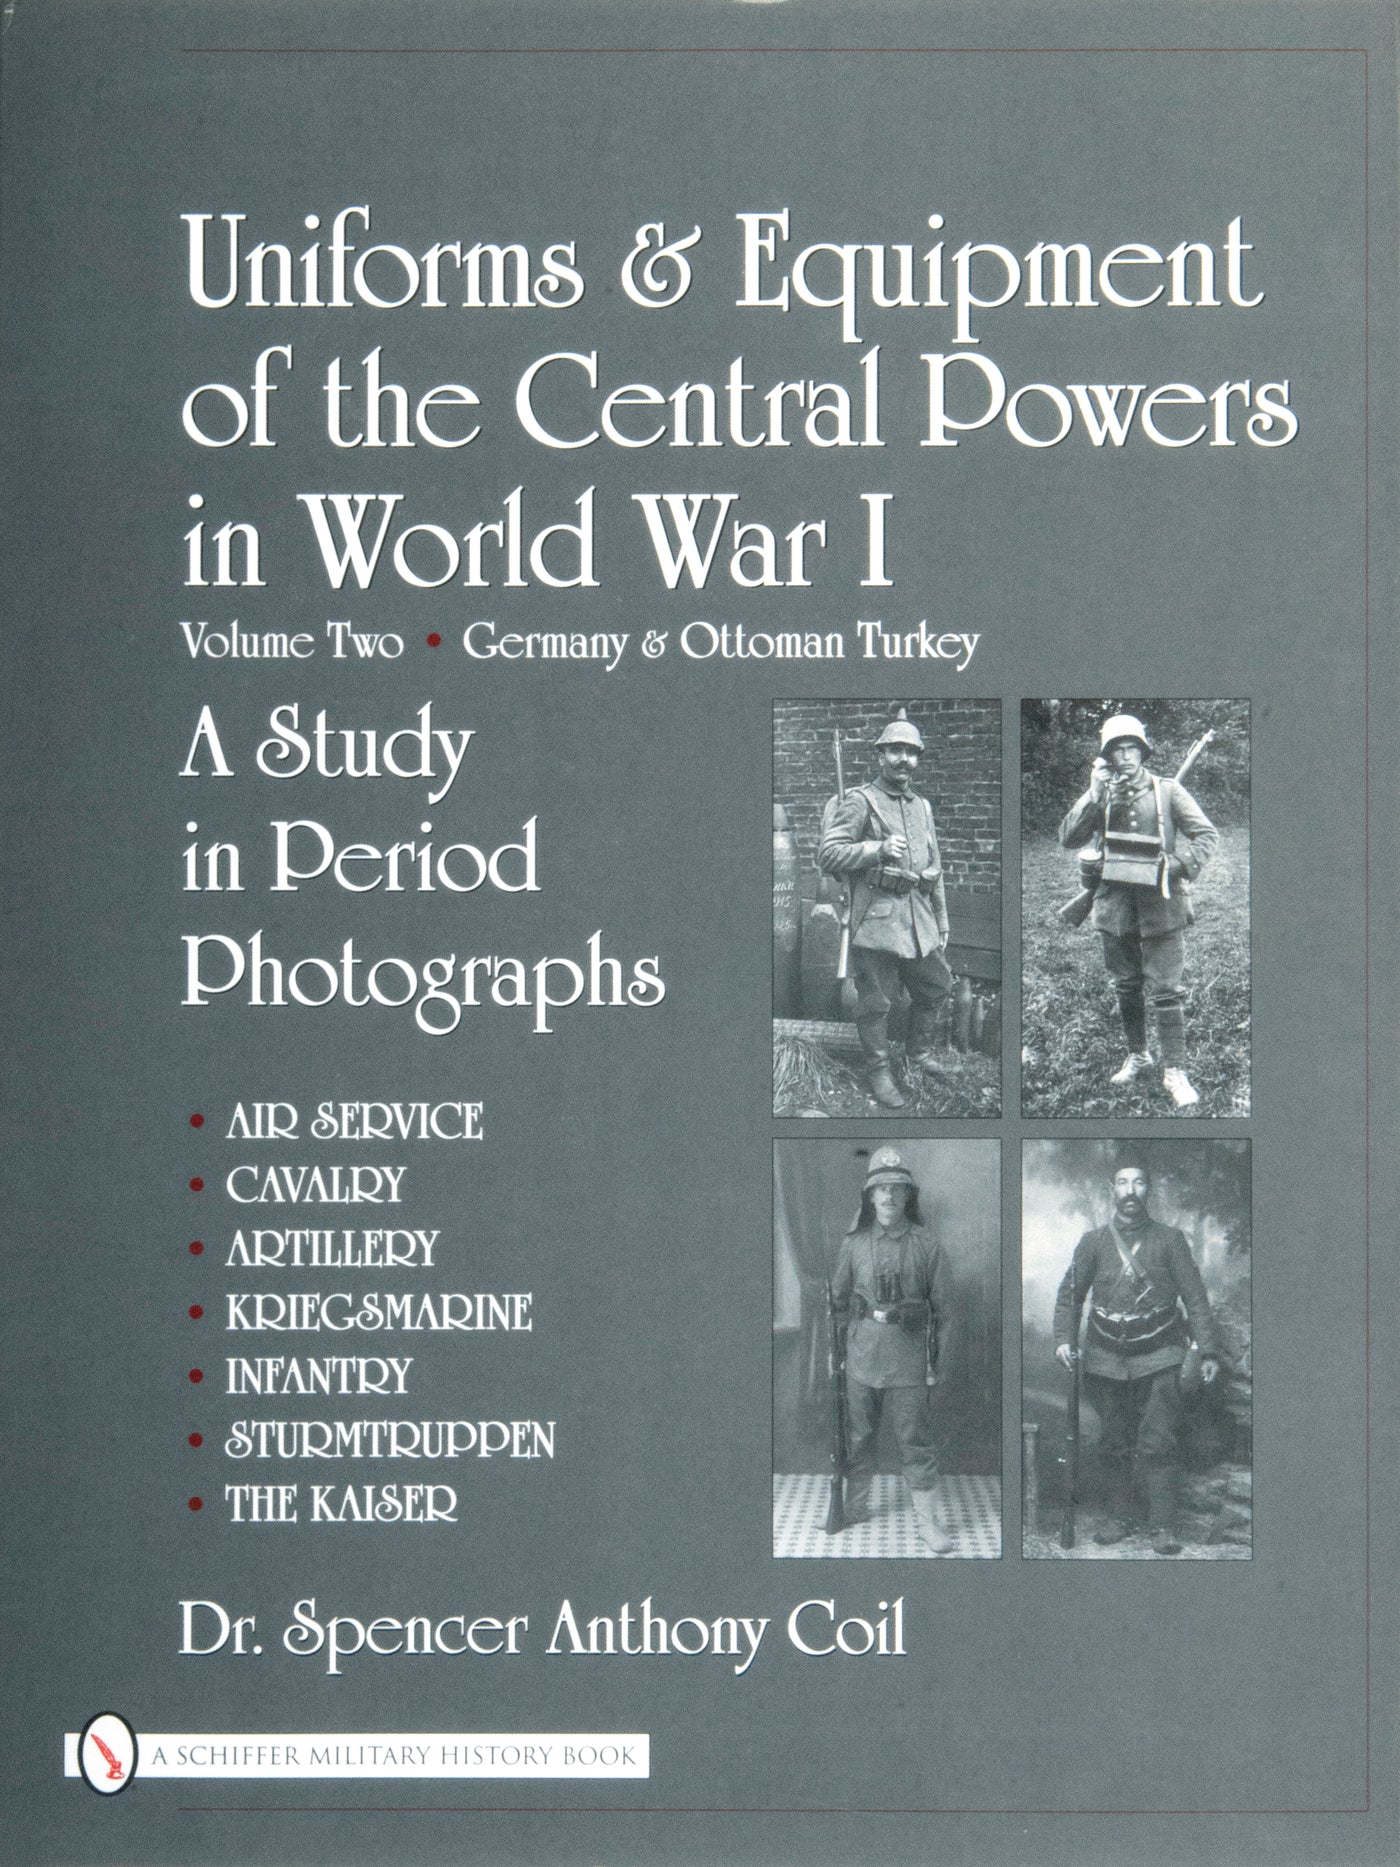 Uniforms & Equipment of the Central Powers in World War I